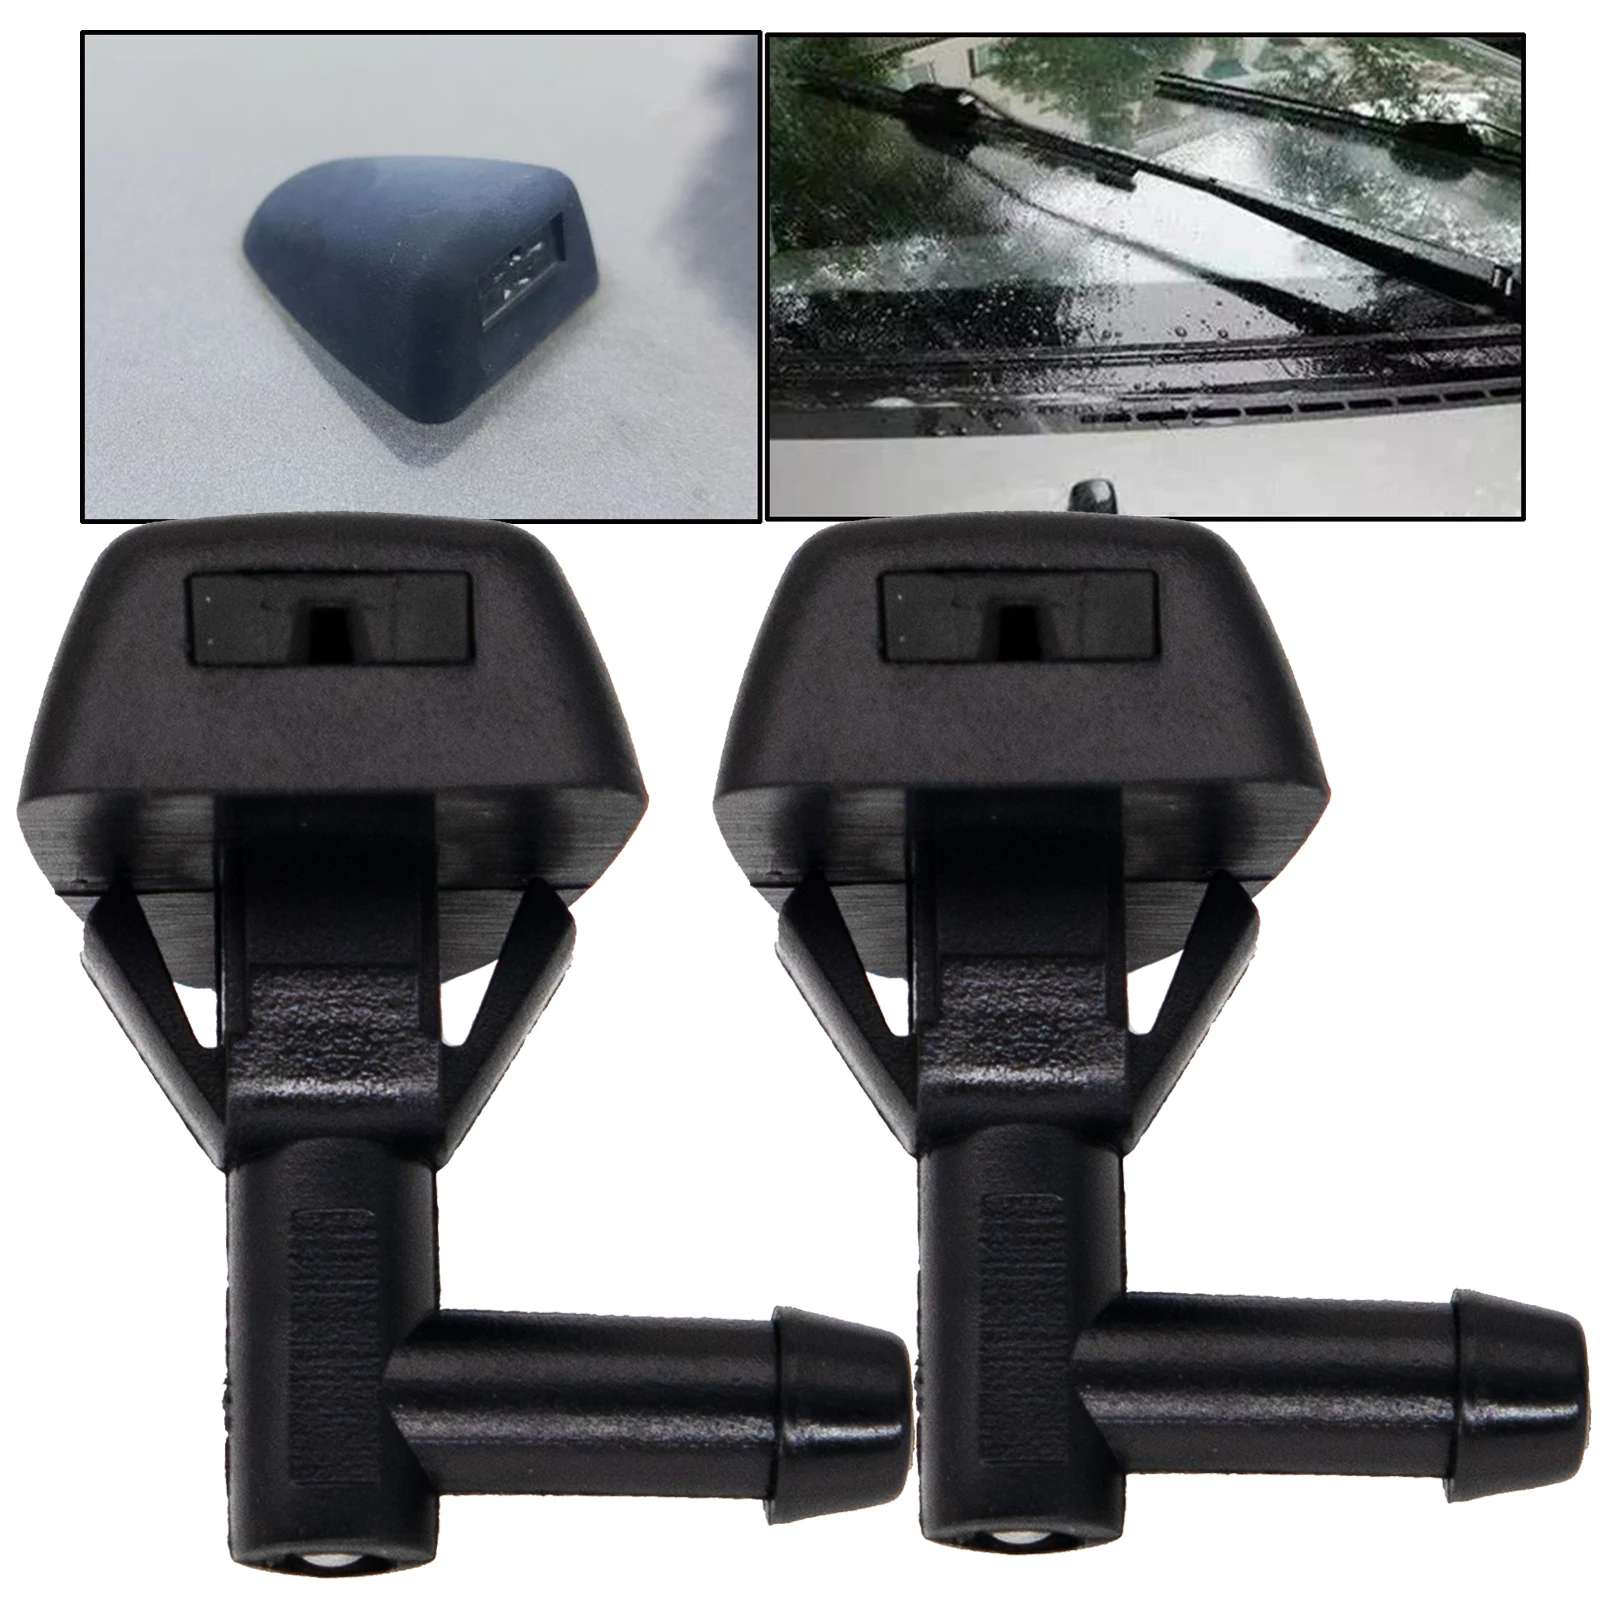 2Pcs Windshield Wiper Jet Washer Nozzle Windscreen Washer Wipers Parts Vehicle Fan Shaped Water Spray For Volvo S60 V70 XC70